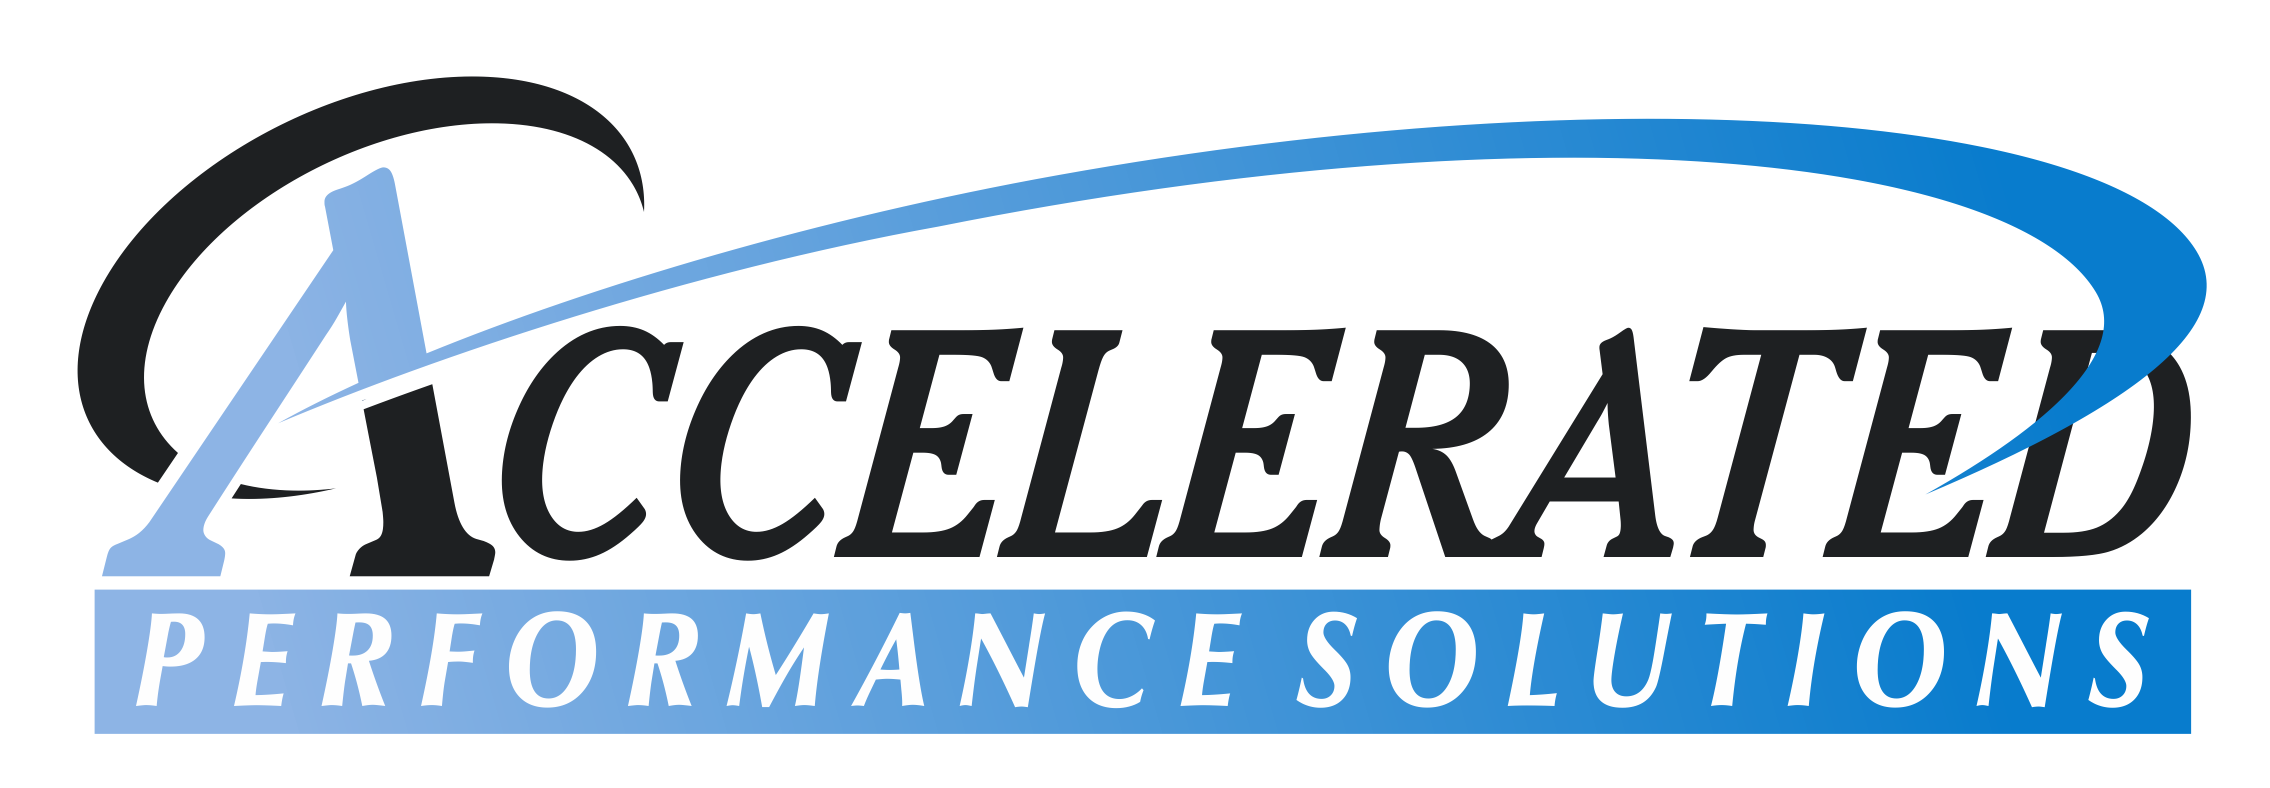 Accelerated Performance Solutions